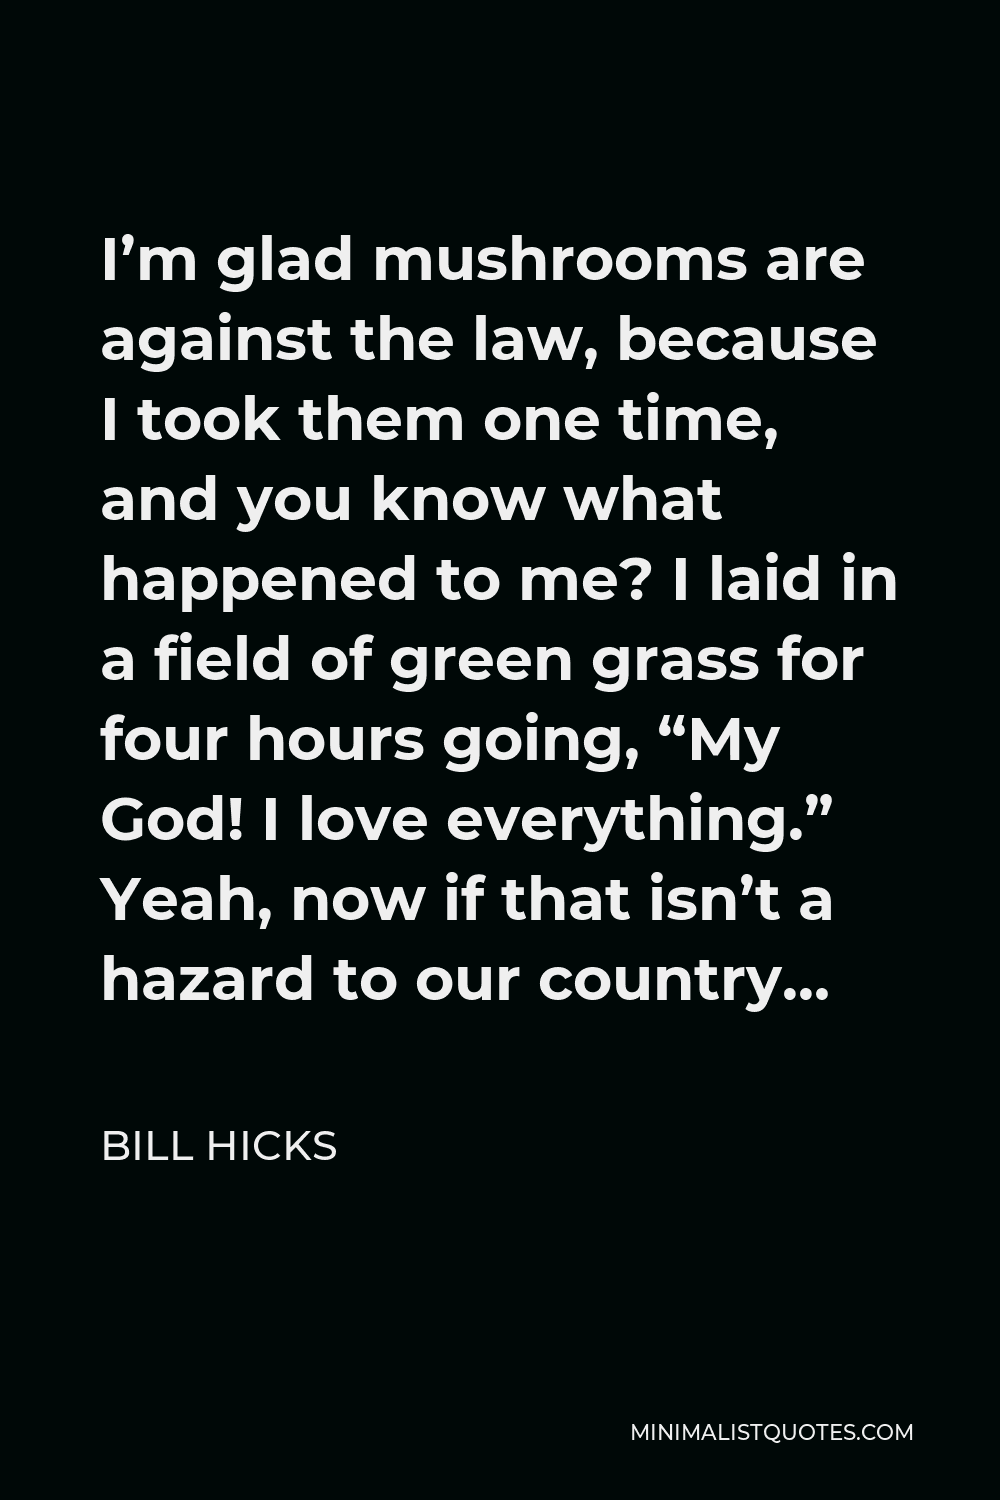 Bill Hicks Quote - I’m glad mushrooms are against the law, because I took them one time, and you know what happened to me? I laid in a field of green grass for four hours going, “My God! I love everything.” Yeah, now if that isn’t a hazard to our country…